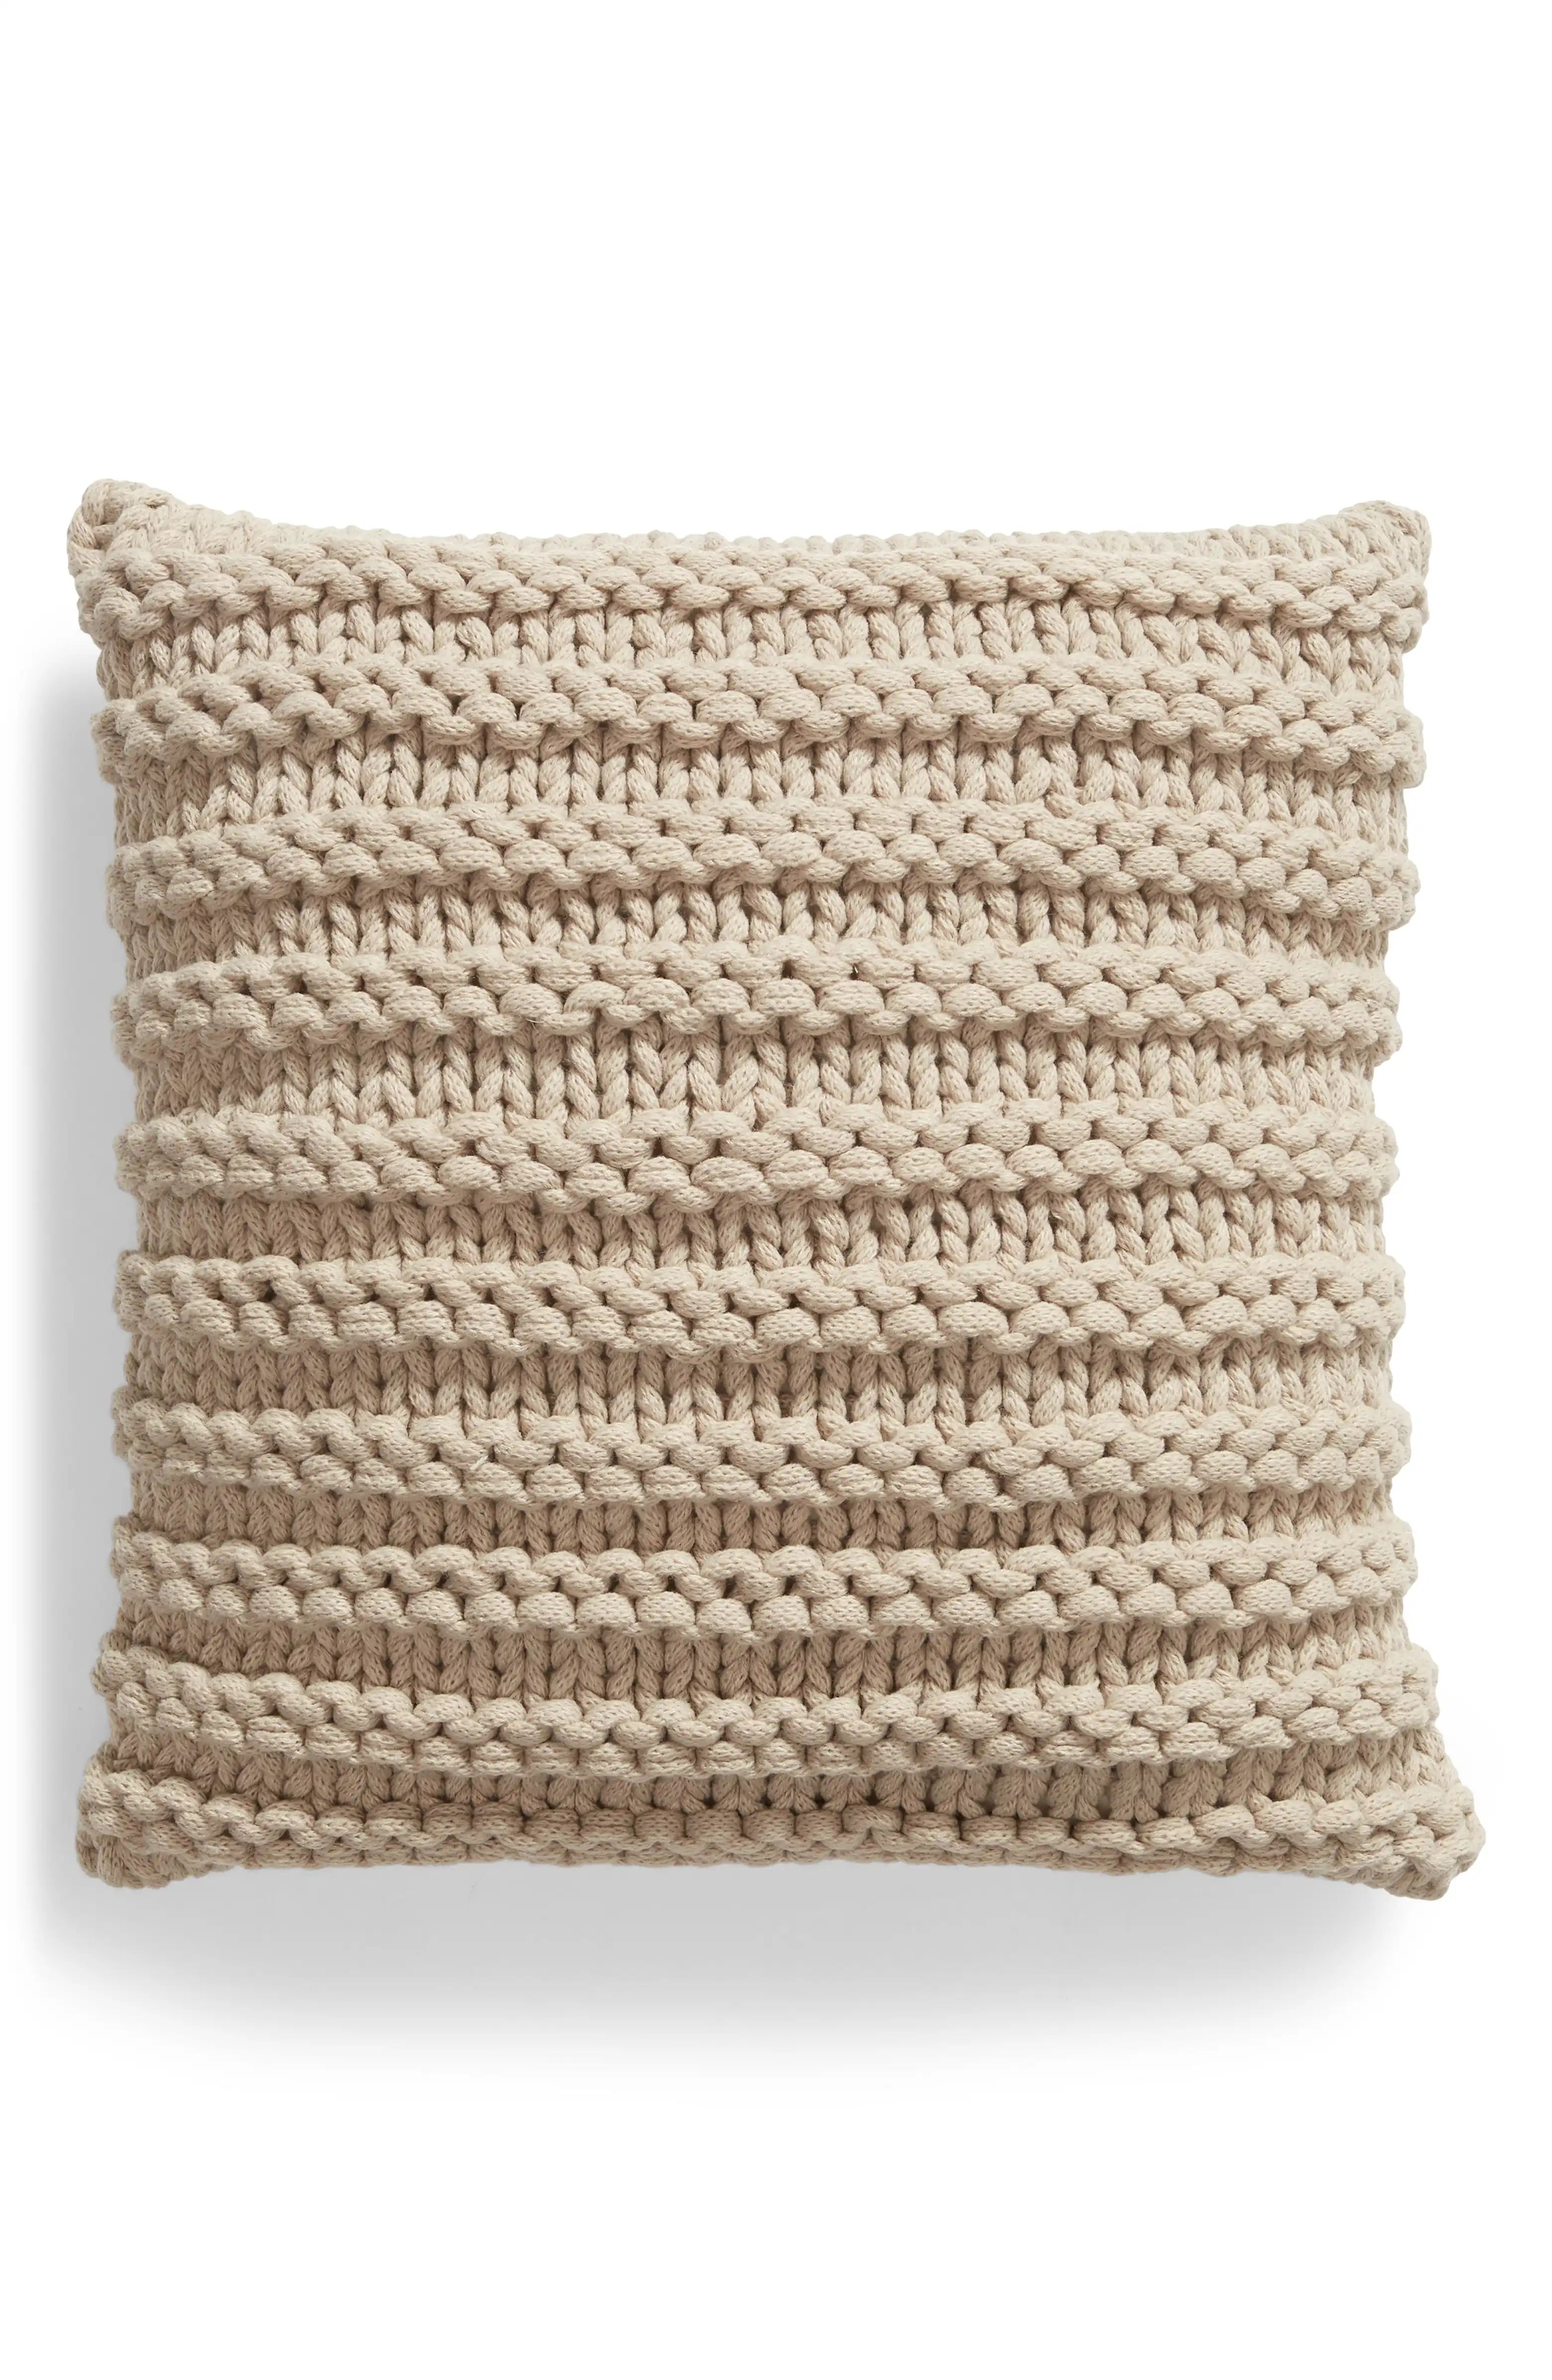 Chunky Knit Accent Pillow | Nordstrom